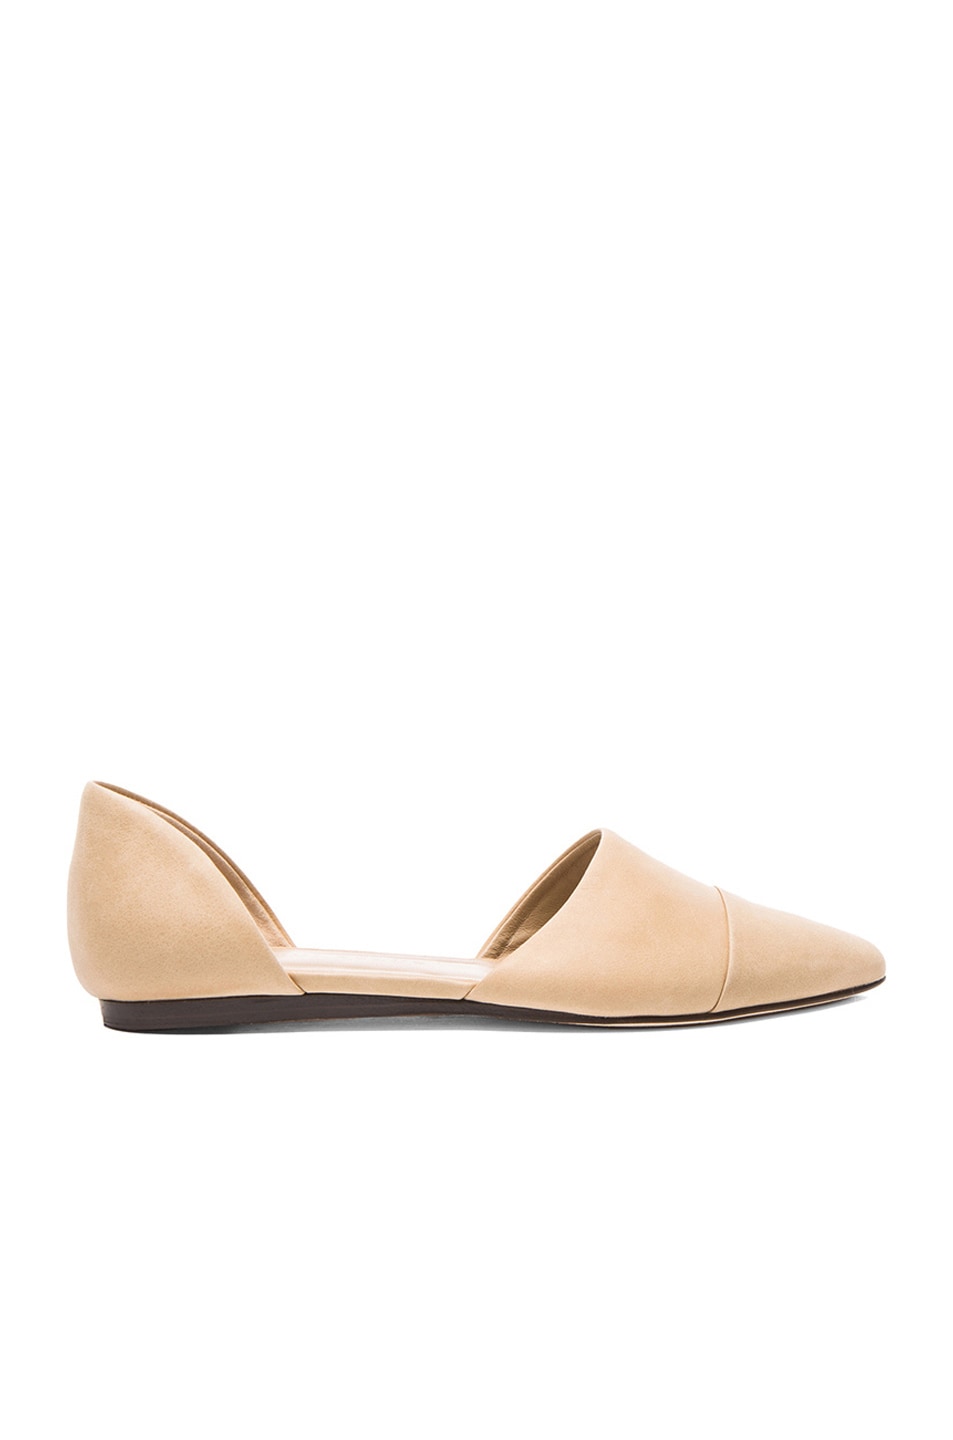 Jenni Kayne D'Orsay Oiled Leather Flats in Natural | FWRD